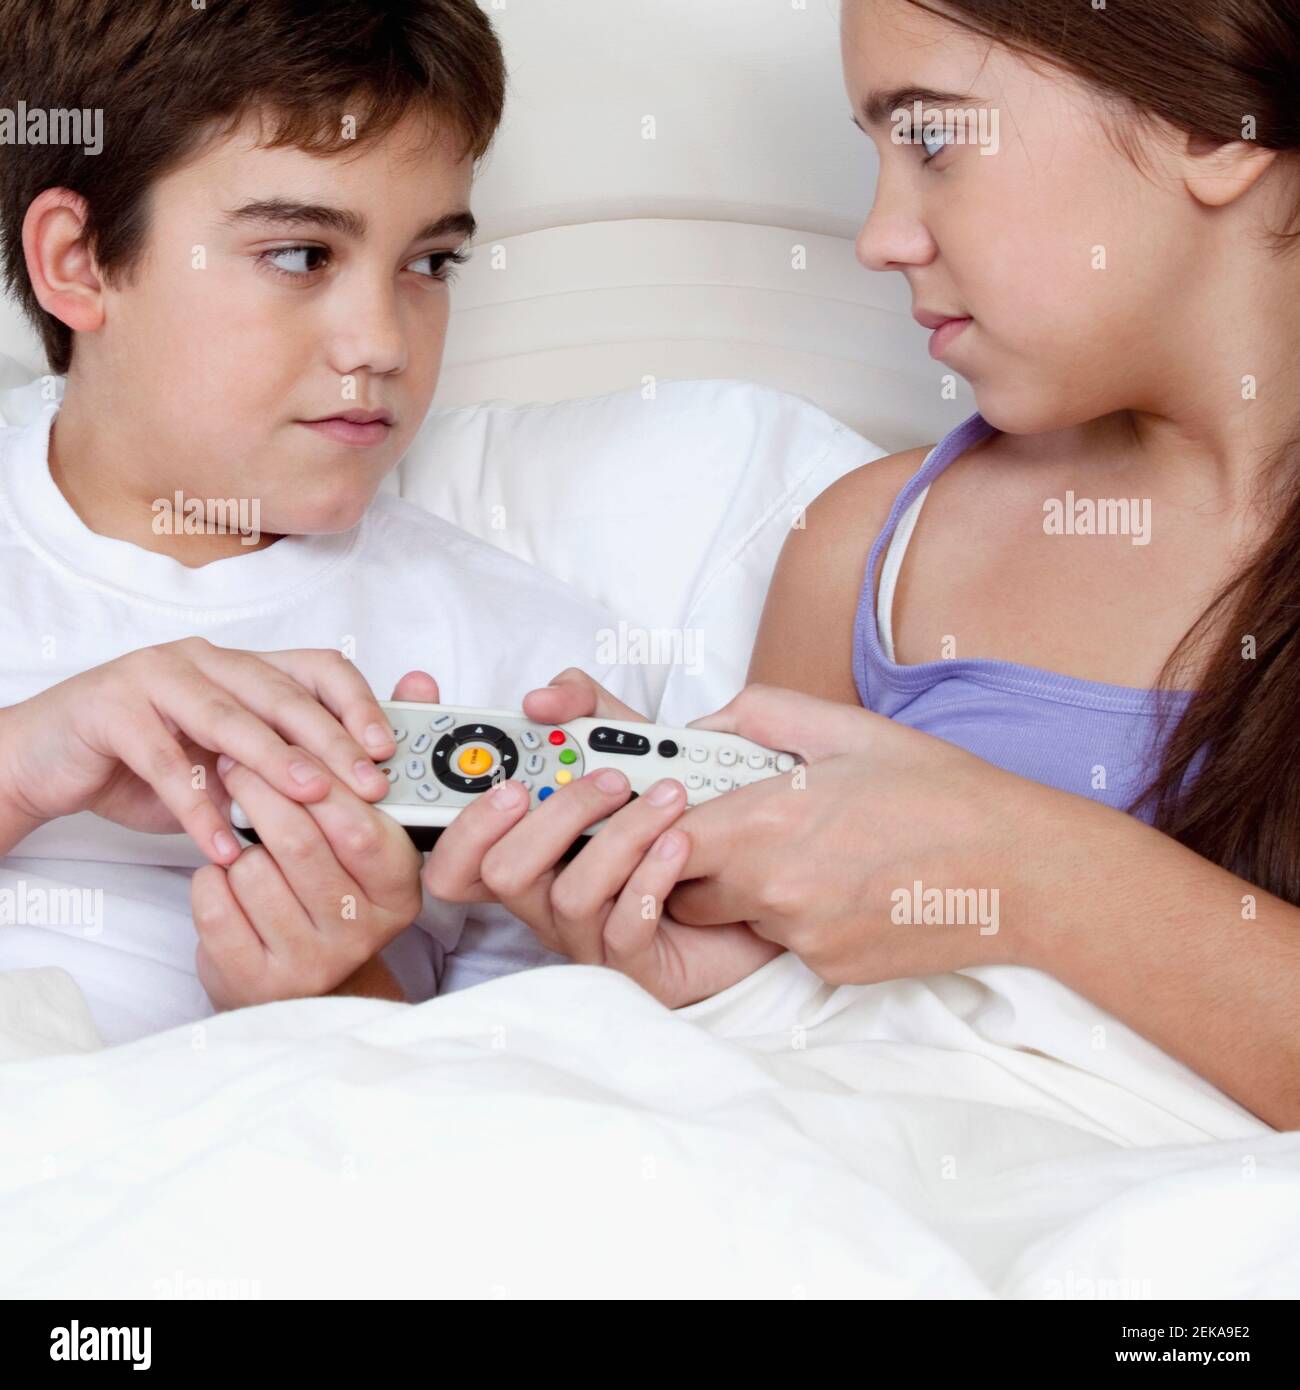 Boy lying in the bed with his sister and arguing over a remote control Stock Photo